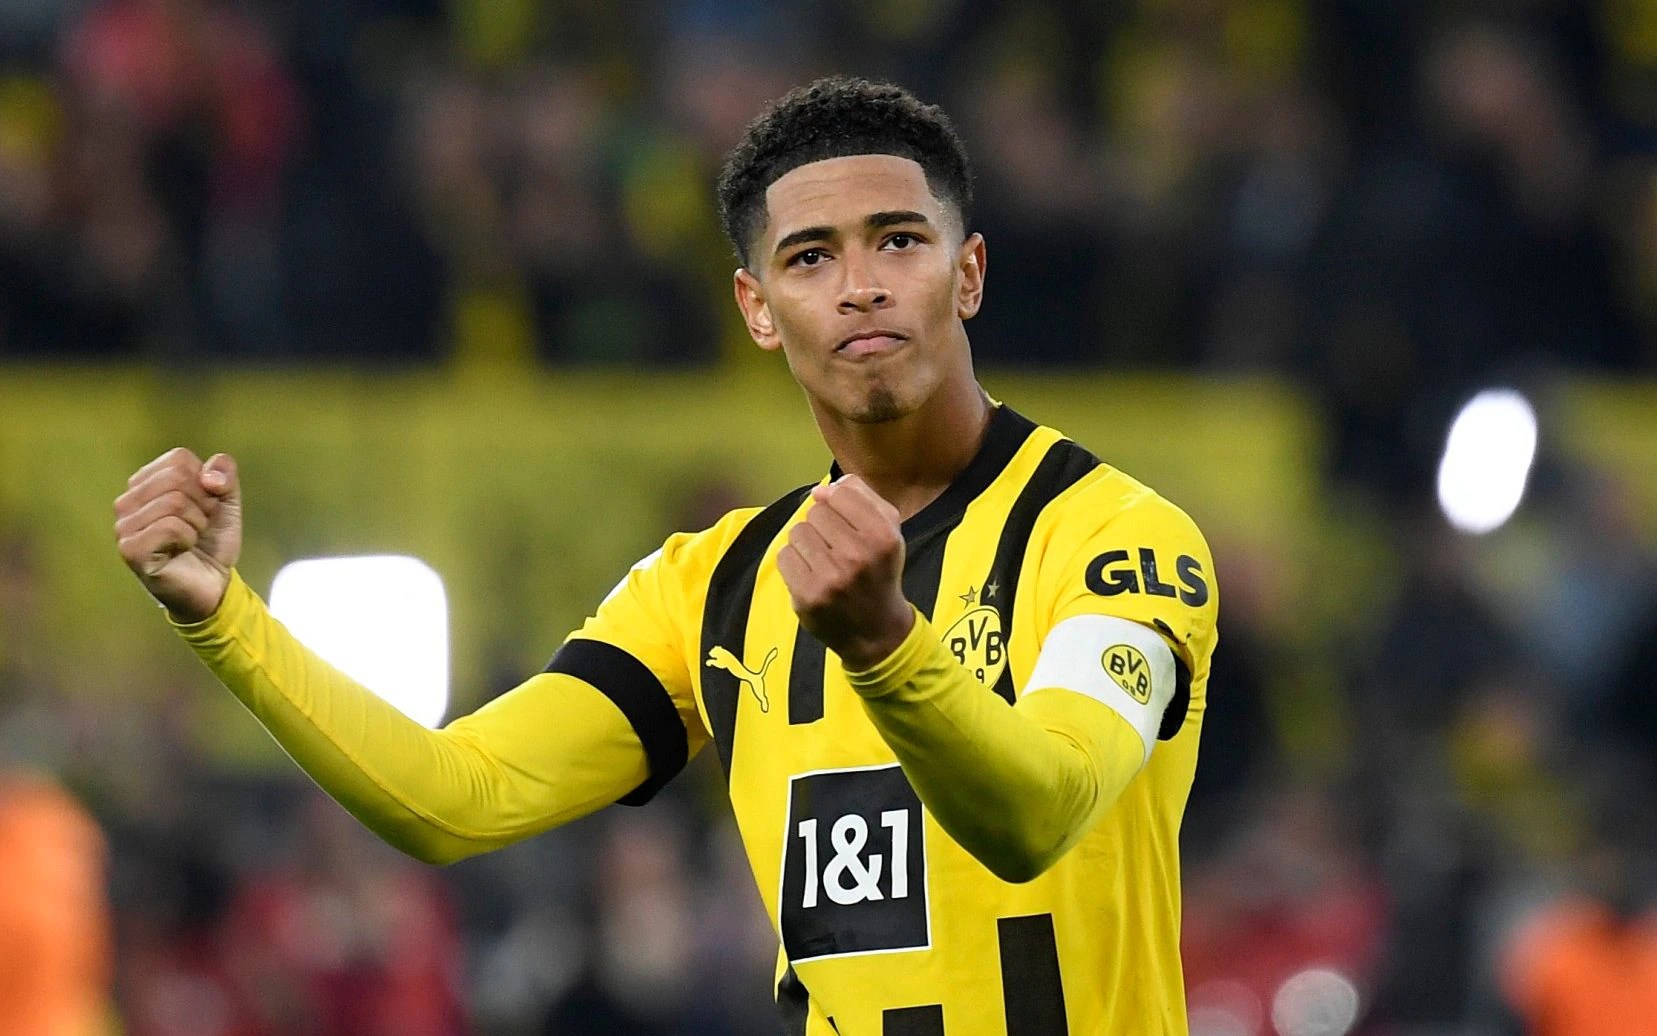 Jude Bellingham Transfer: Manchester City, Liverpool, Manchester United, Chelsea, and Real Madrid are INTERESTED in Borussia Dortmund teenager Jude Bellingham - Check out